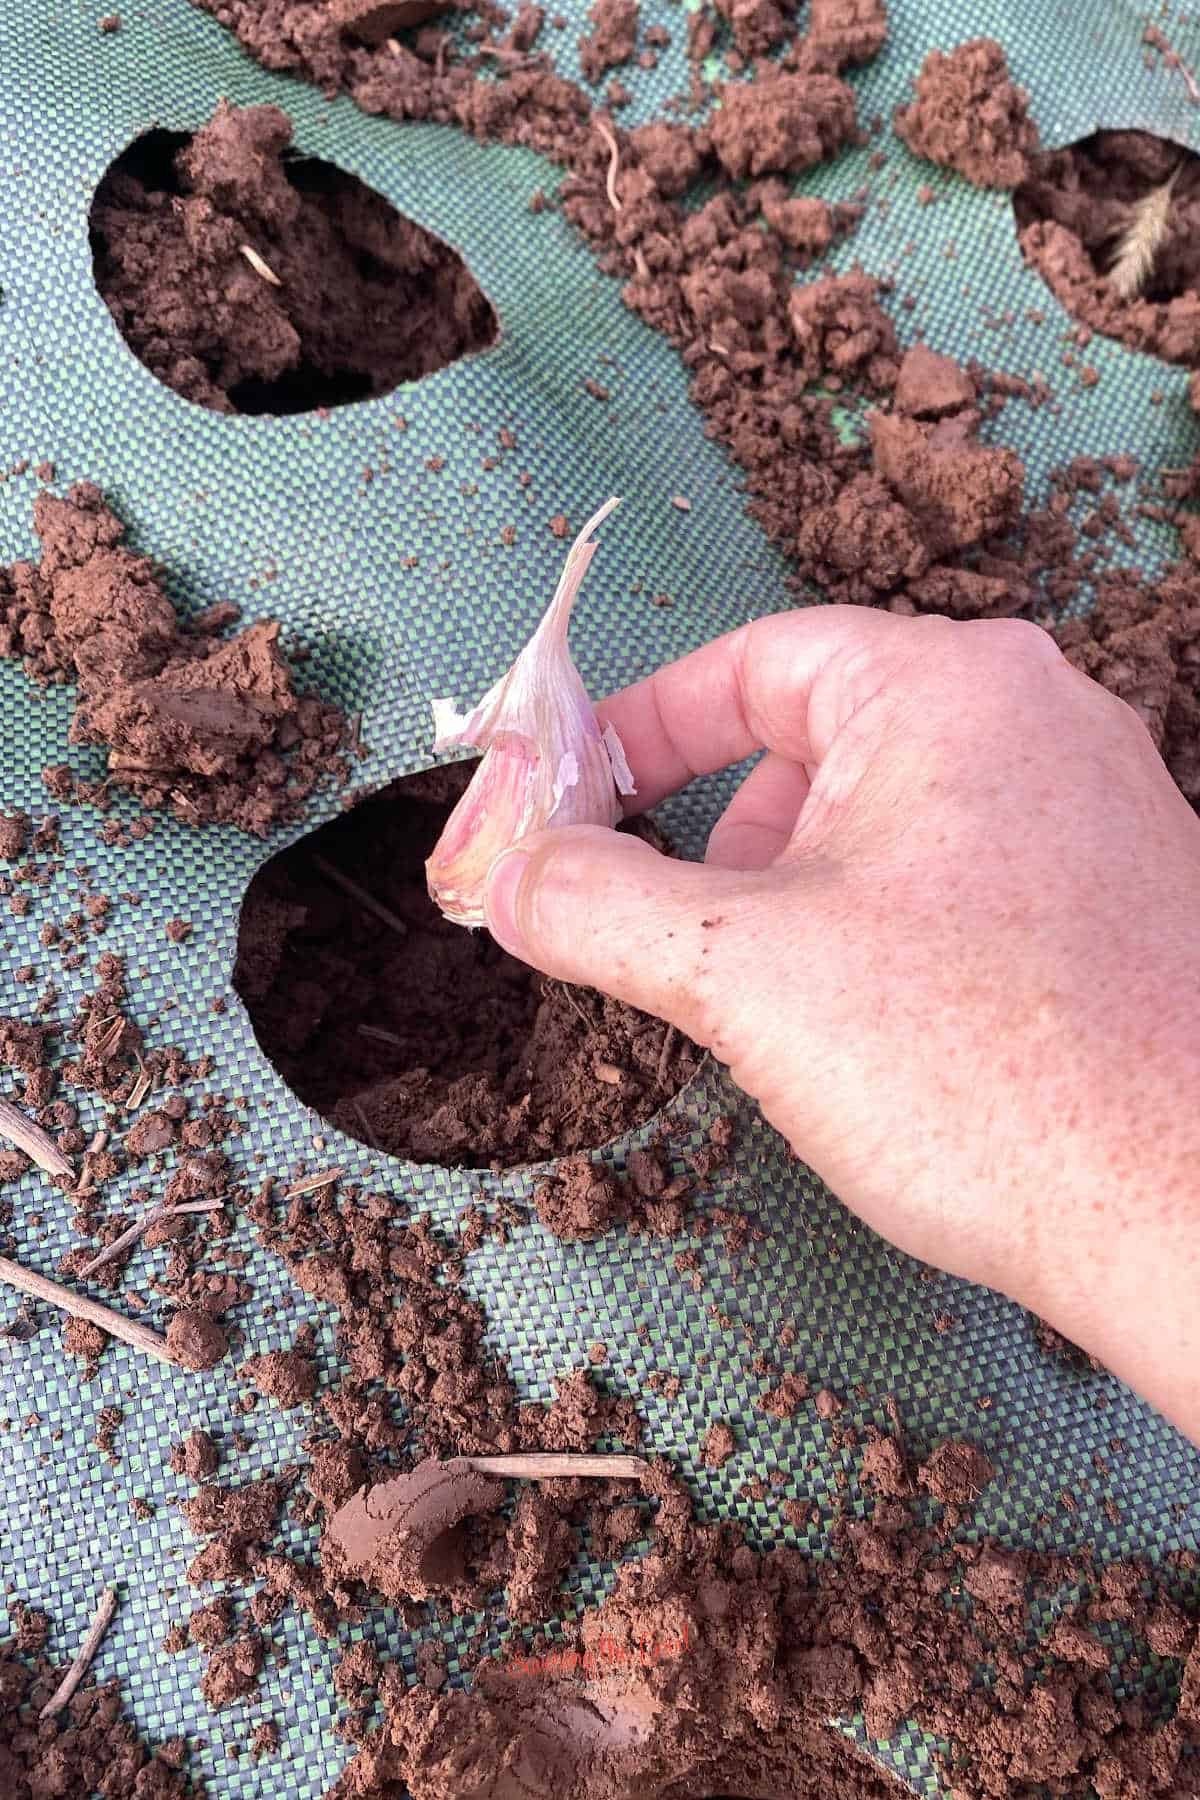 hand planting a clove, root side down in a hold in the garden